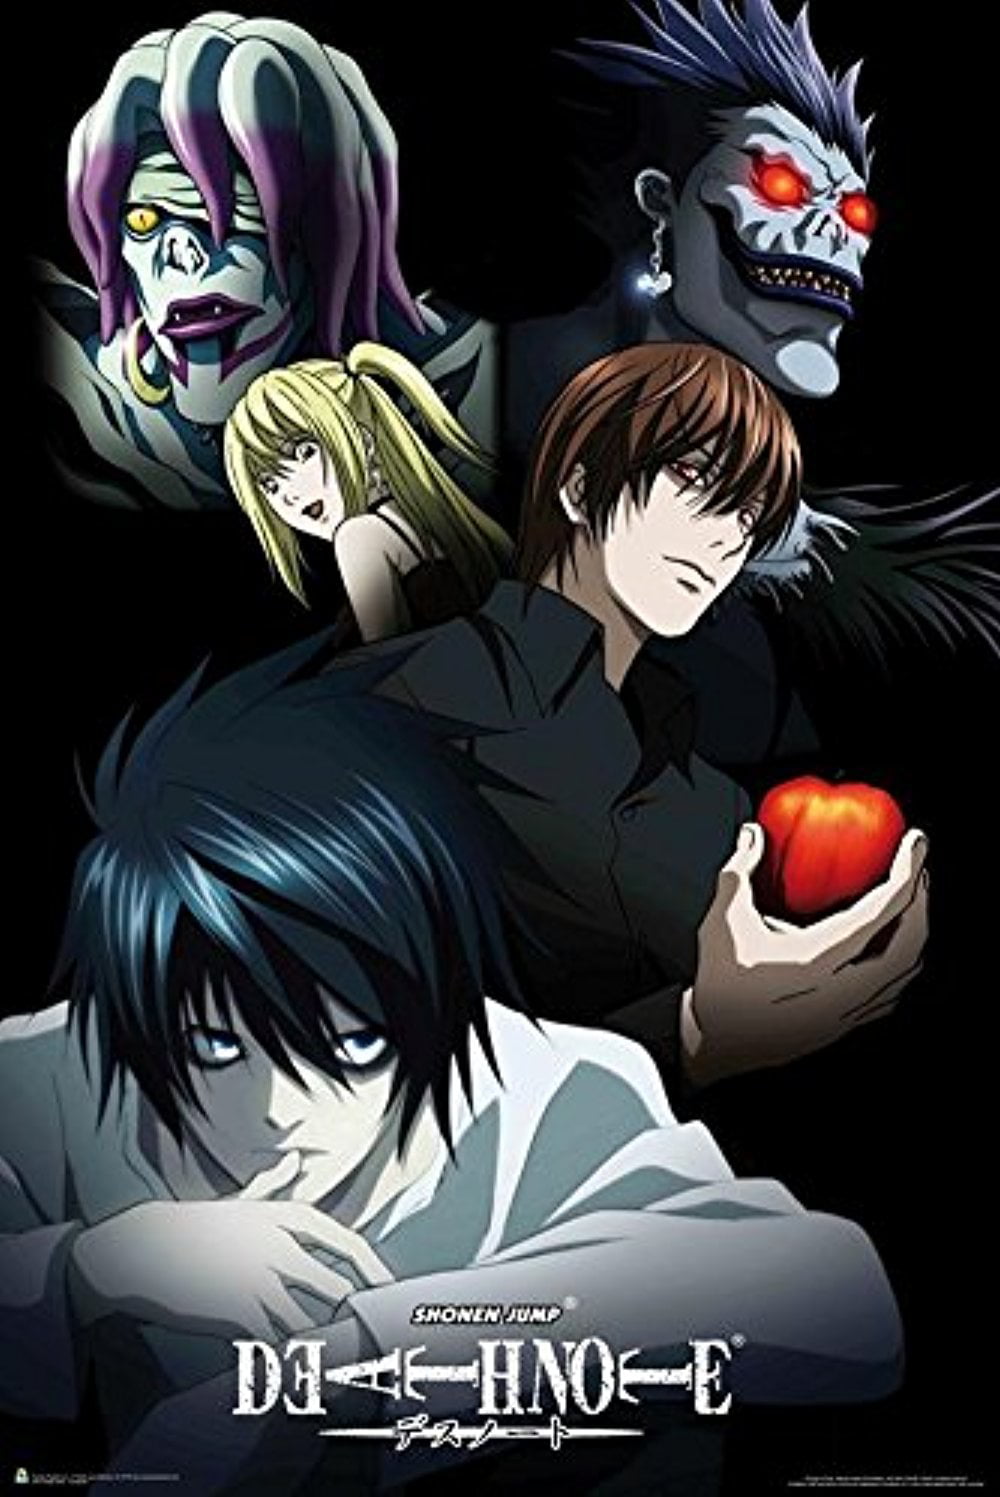 Shonen Jump Death Note Characters Anime Laminated Poster 24.5 x 36.5 inches 